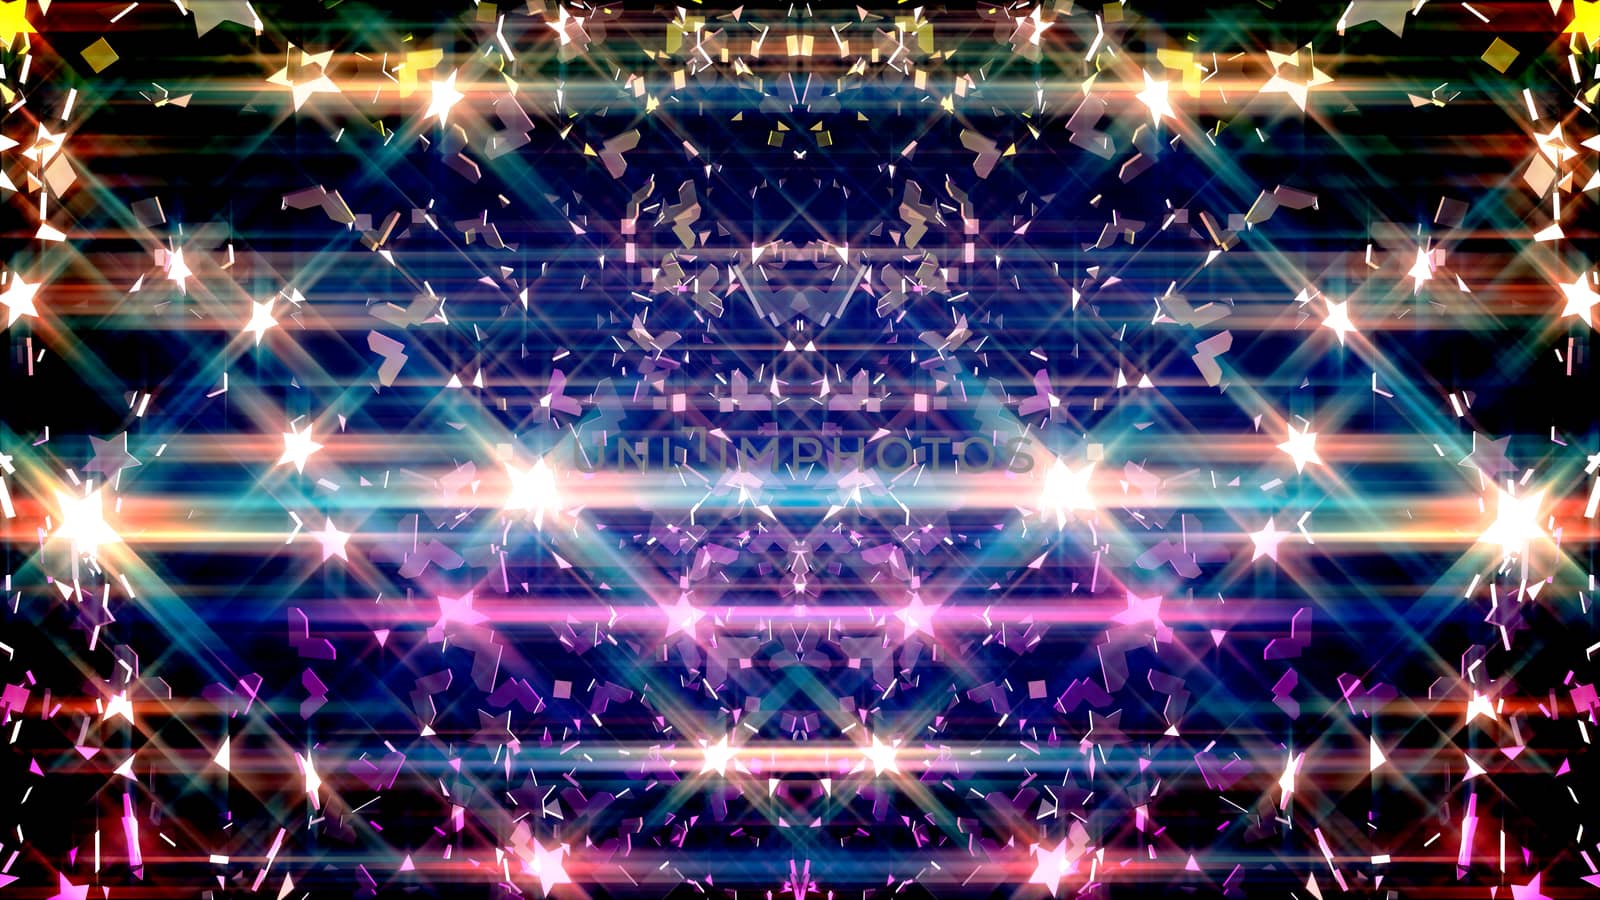 3d illustration of scattering stars and shatter pieces with glow and glitter. Mirror effect.